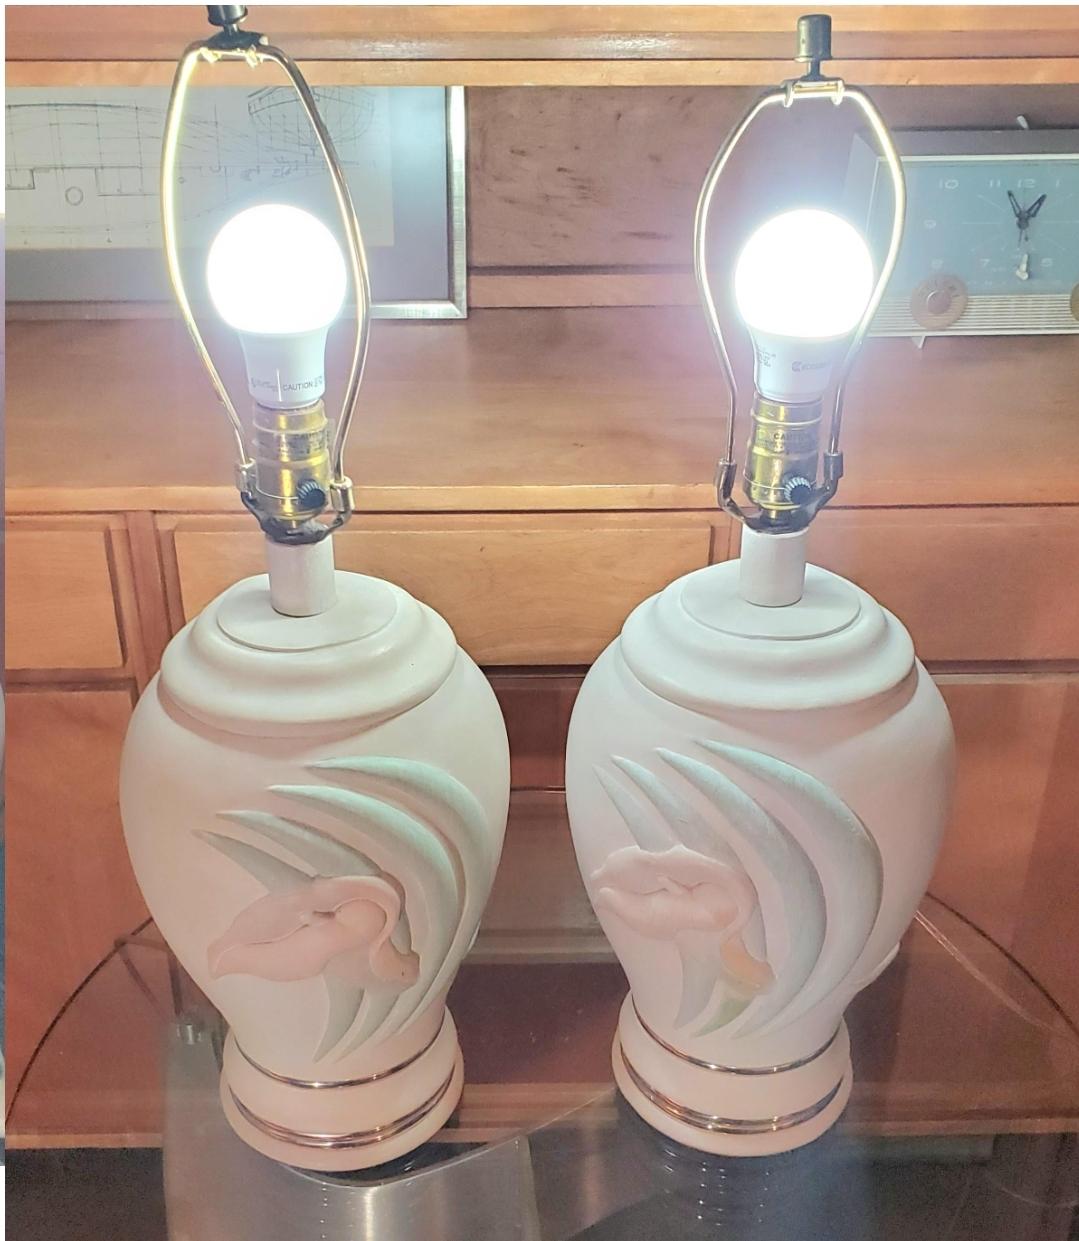 Unknown 1980s Postmodern Collective Elegance Pastel Ceramic Lamps, a Pair For Sale